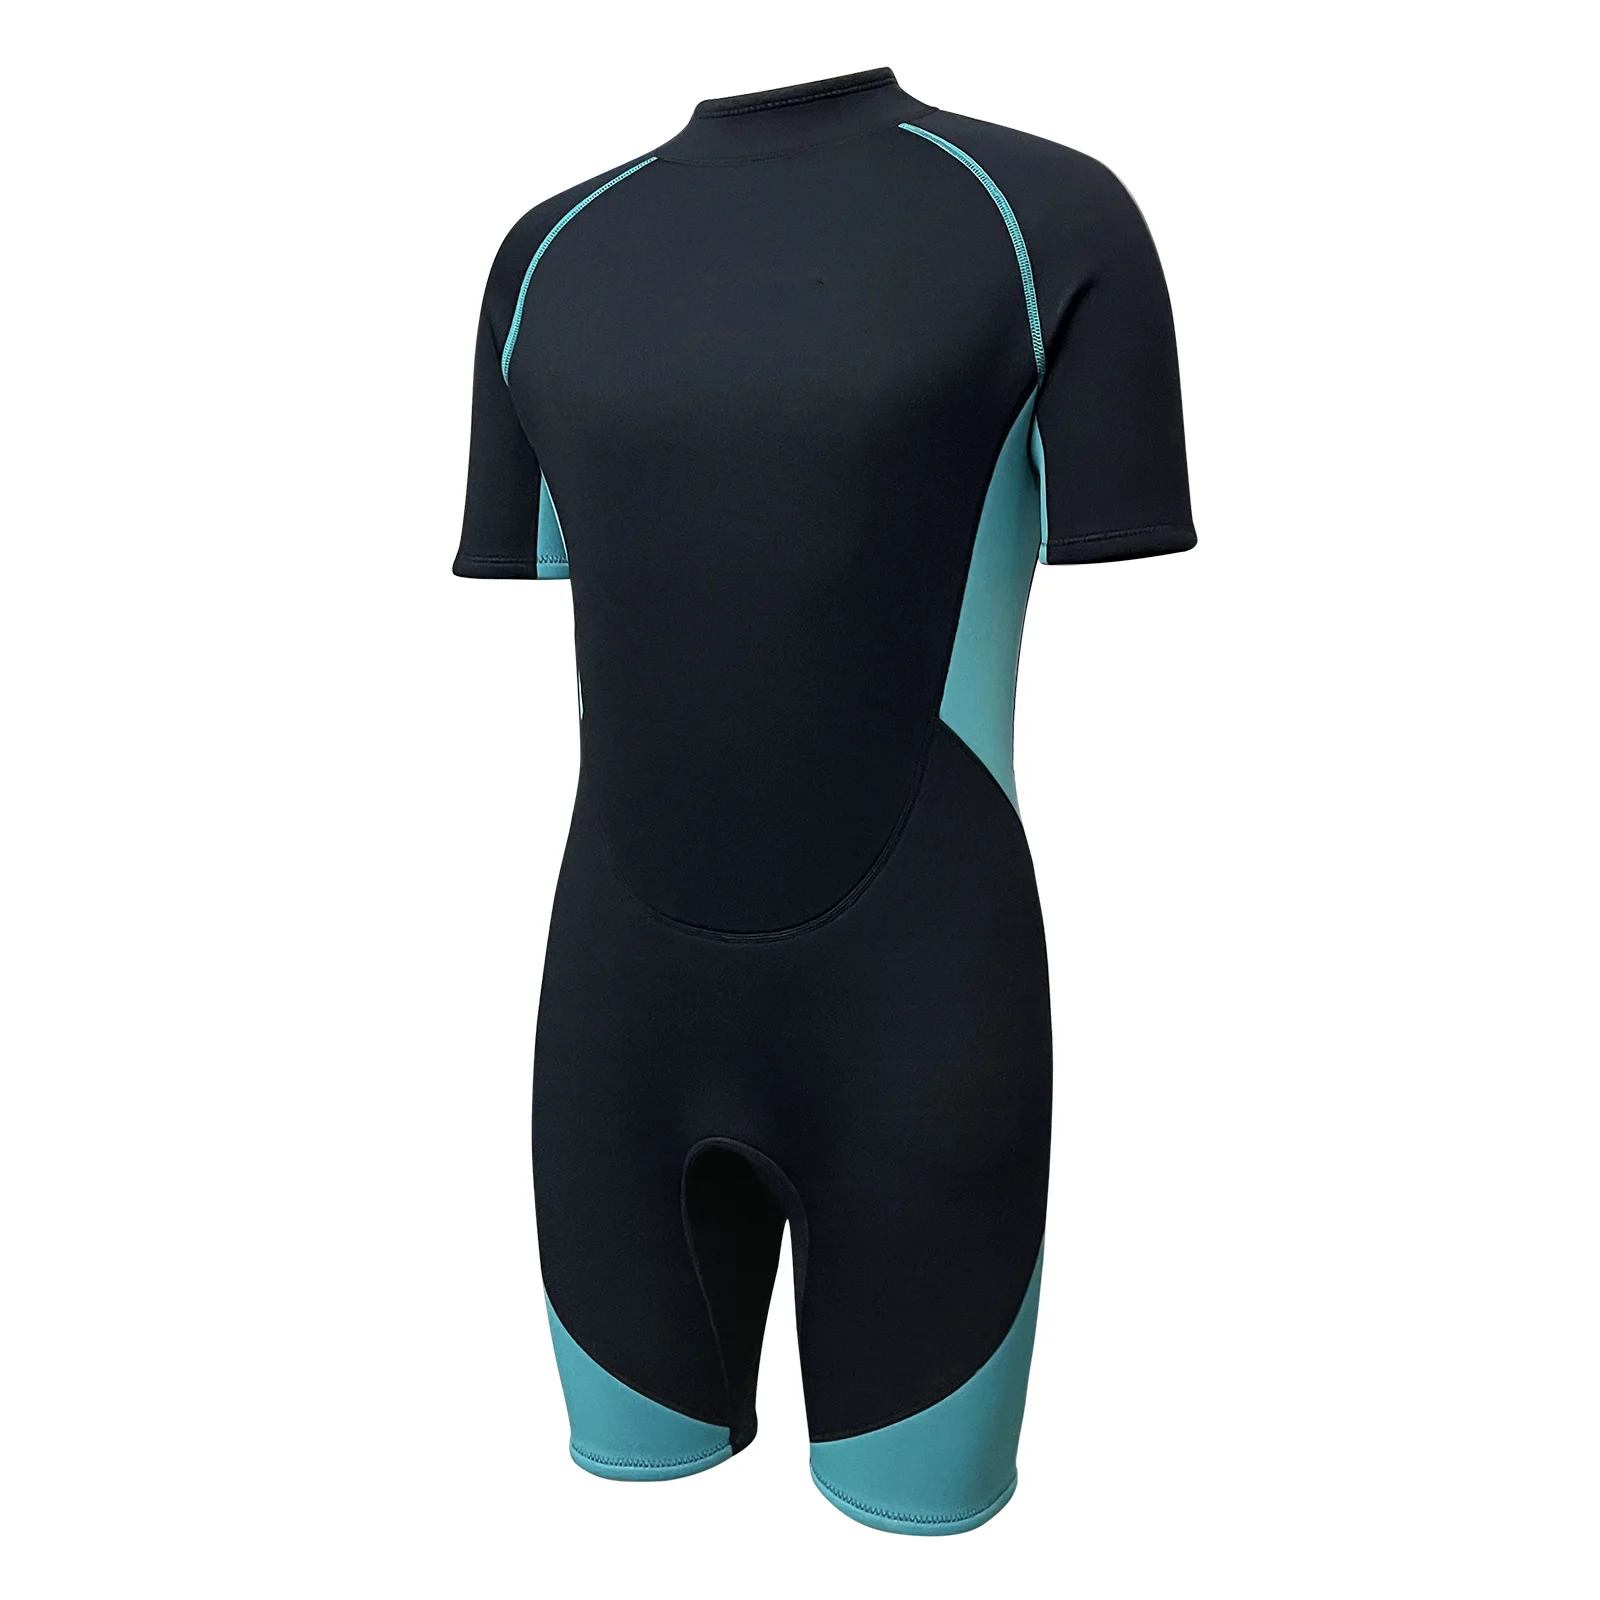 3MM One-piece Short-sleeved Wetsuit Surfing Suit Sunscreen Snorkeling Suit Men's Wetsuit Warm And Cold-proof surfing suit